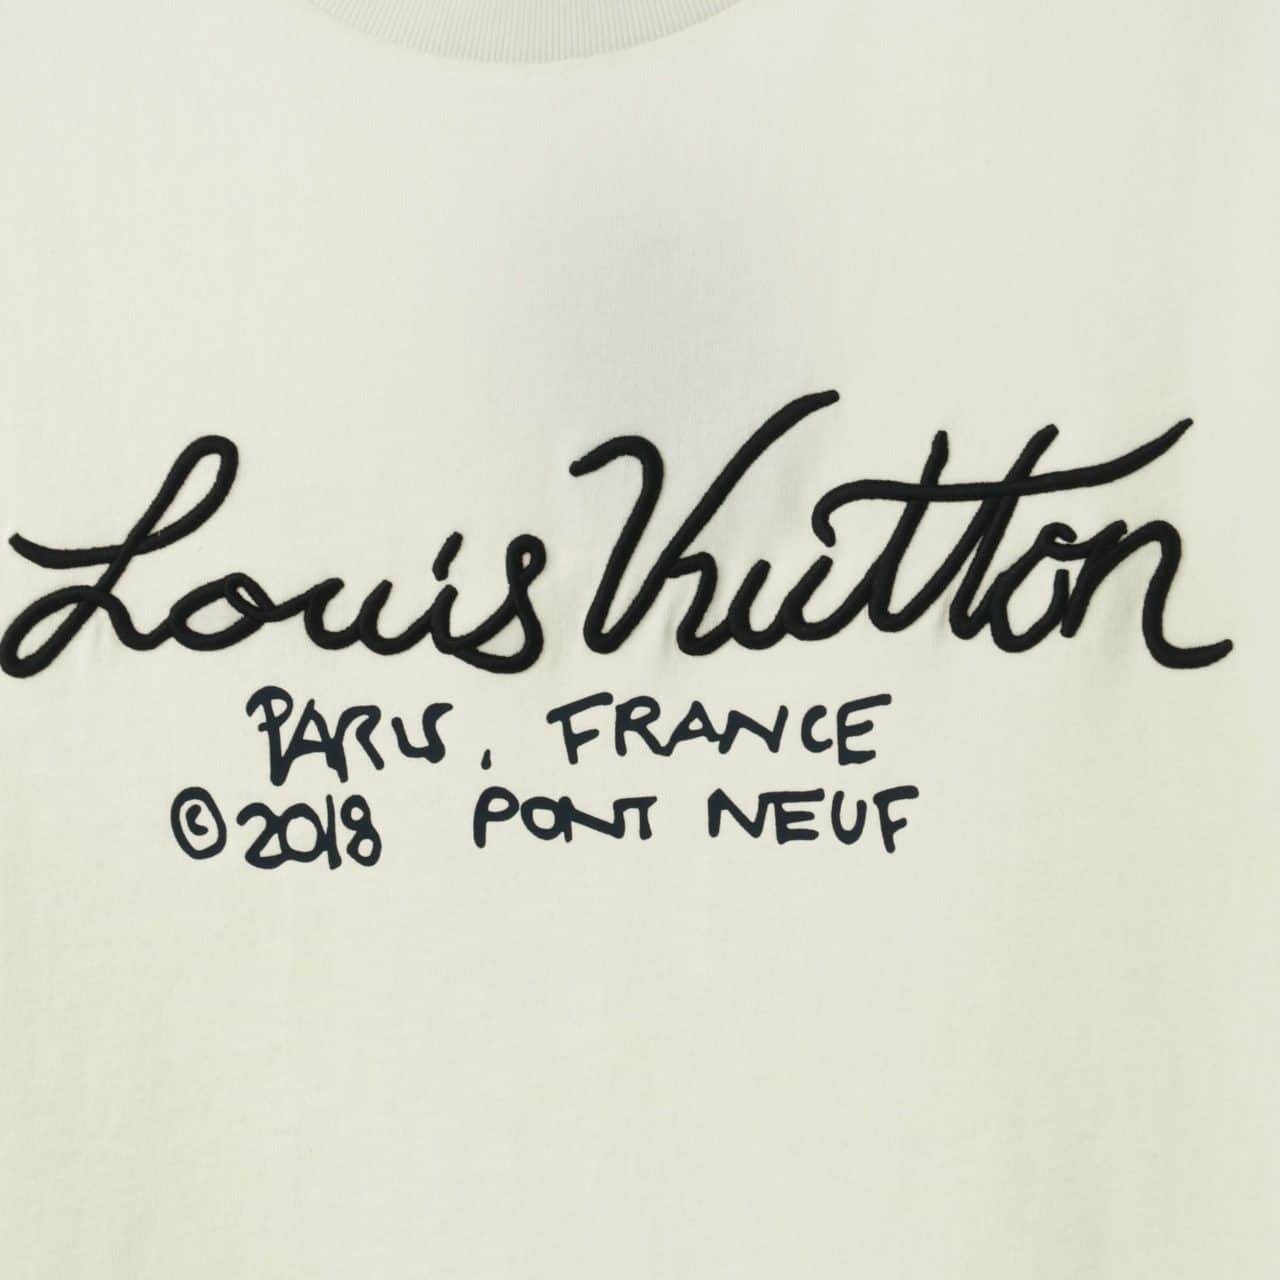 LOUIS VUITTON LV PLANES PRINTED T-SHIRT - LV15 - REPGOD.ORG/IS - Trusted  Replica Products - ReplicaGods - REPGODS.ORG